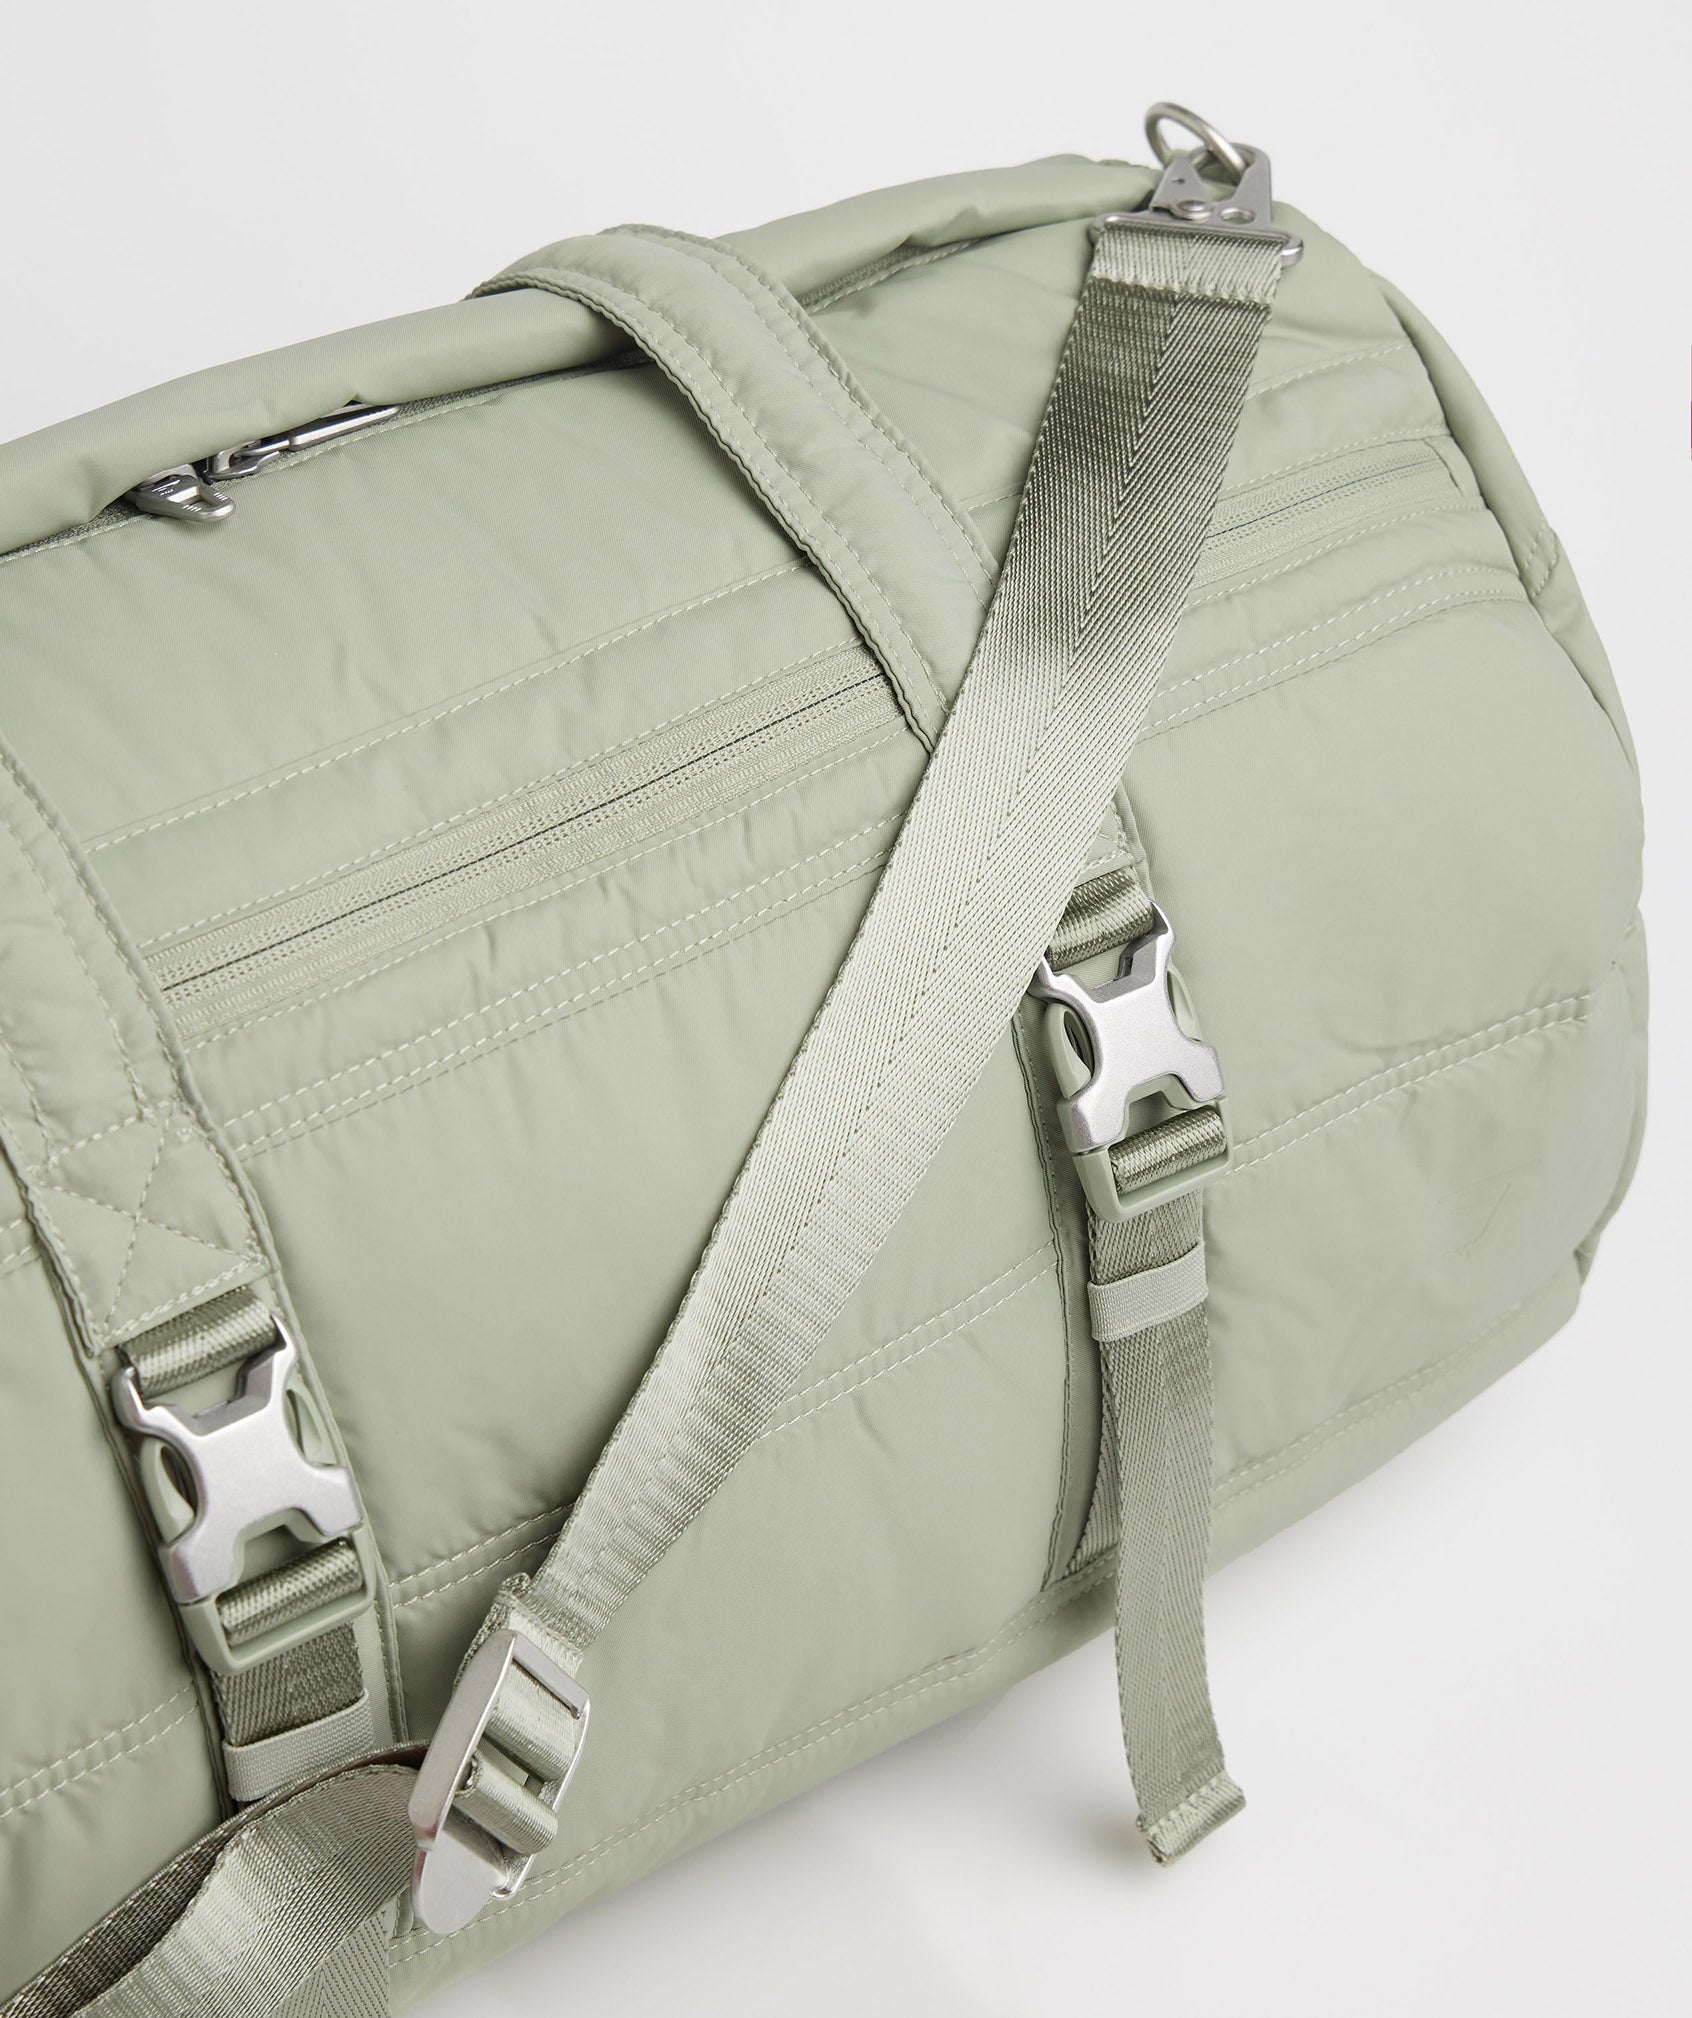 Premium Lifestyle Barrel Bag in Light Olive Green - view 3